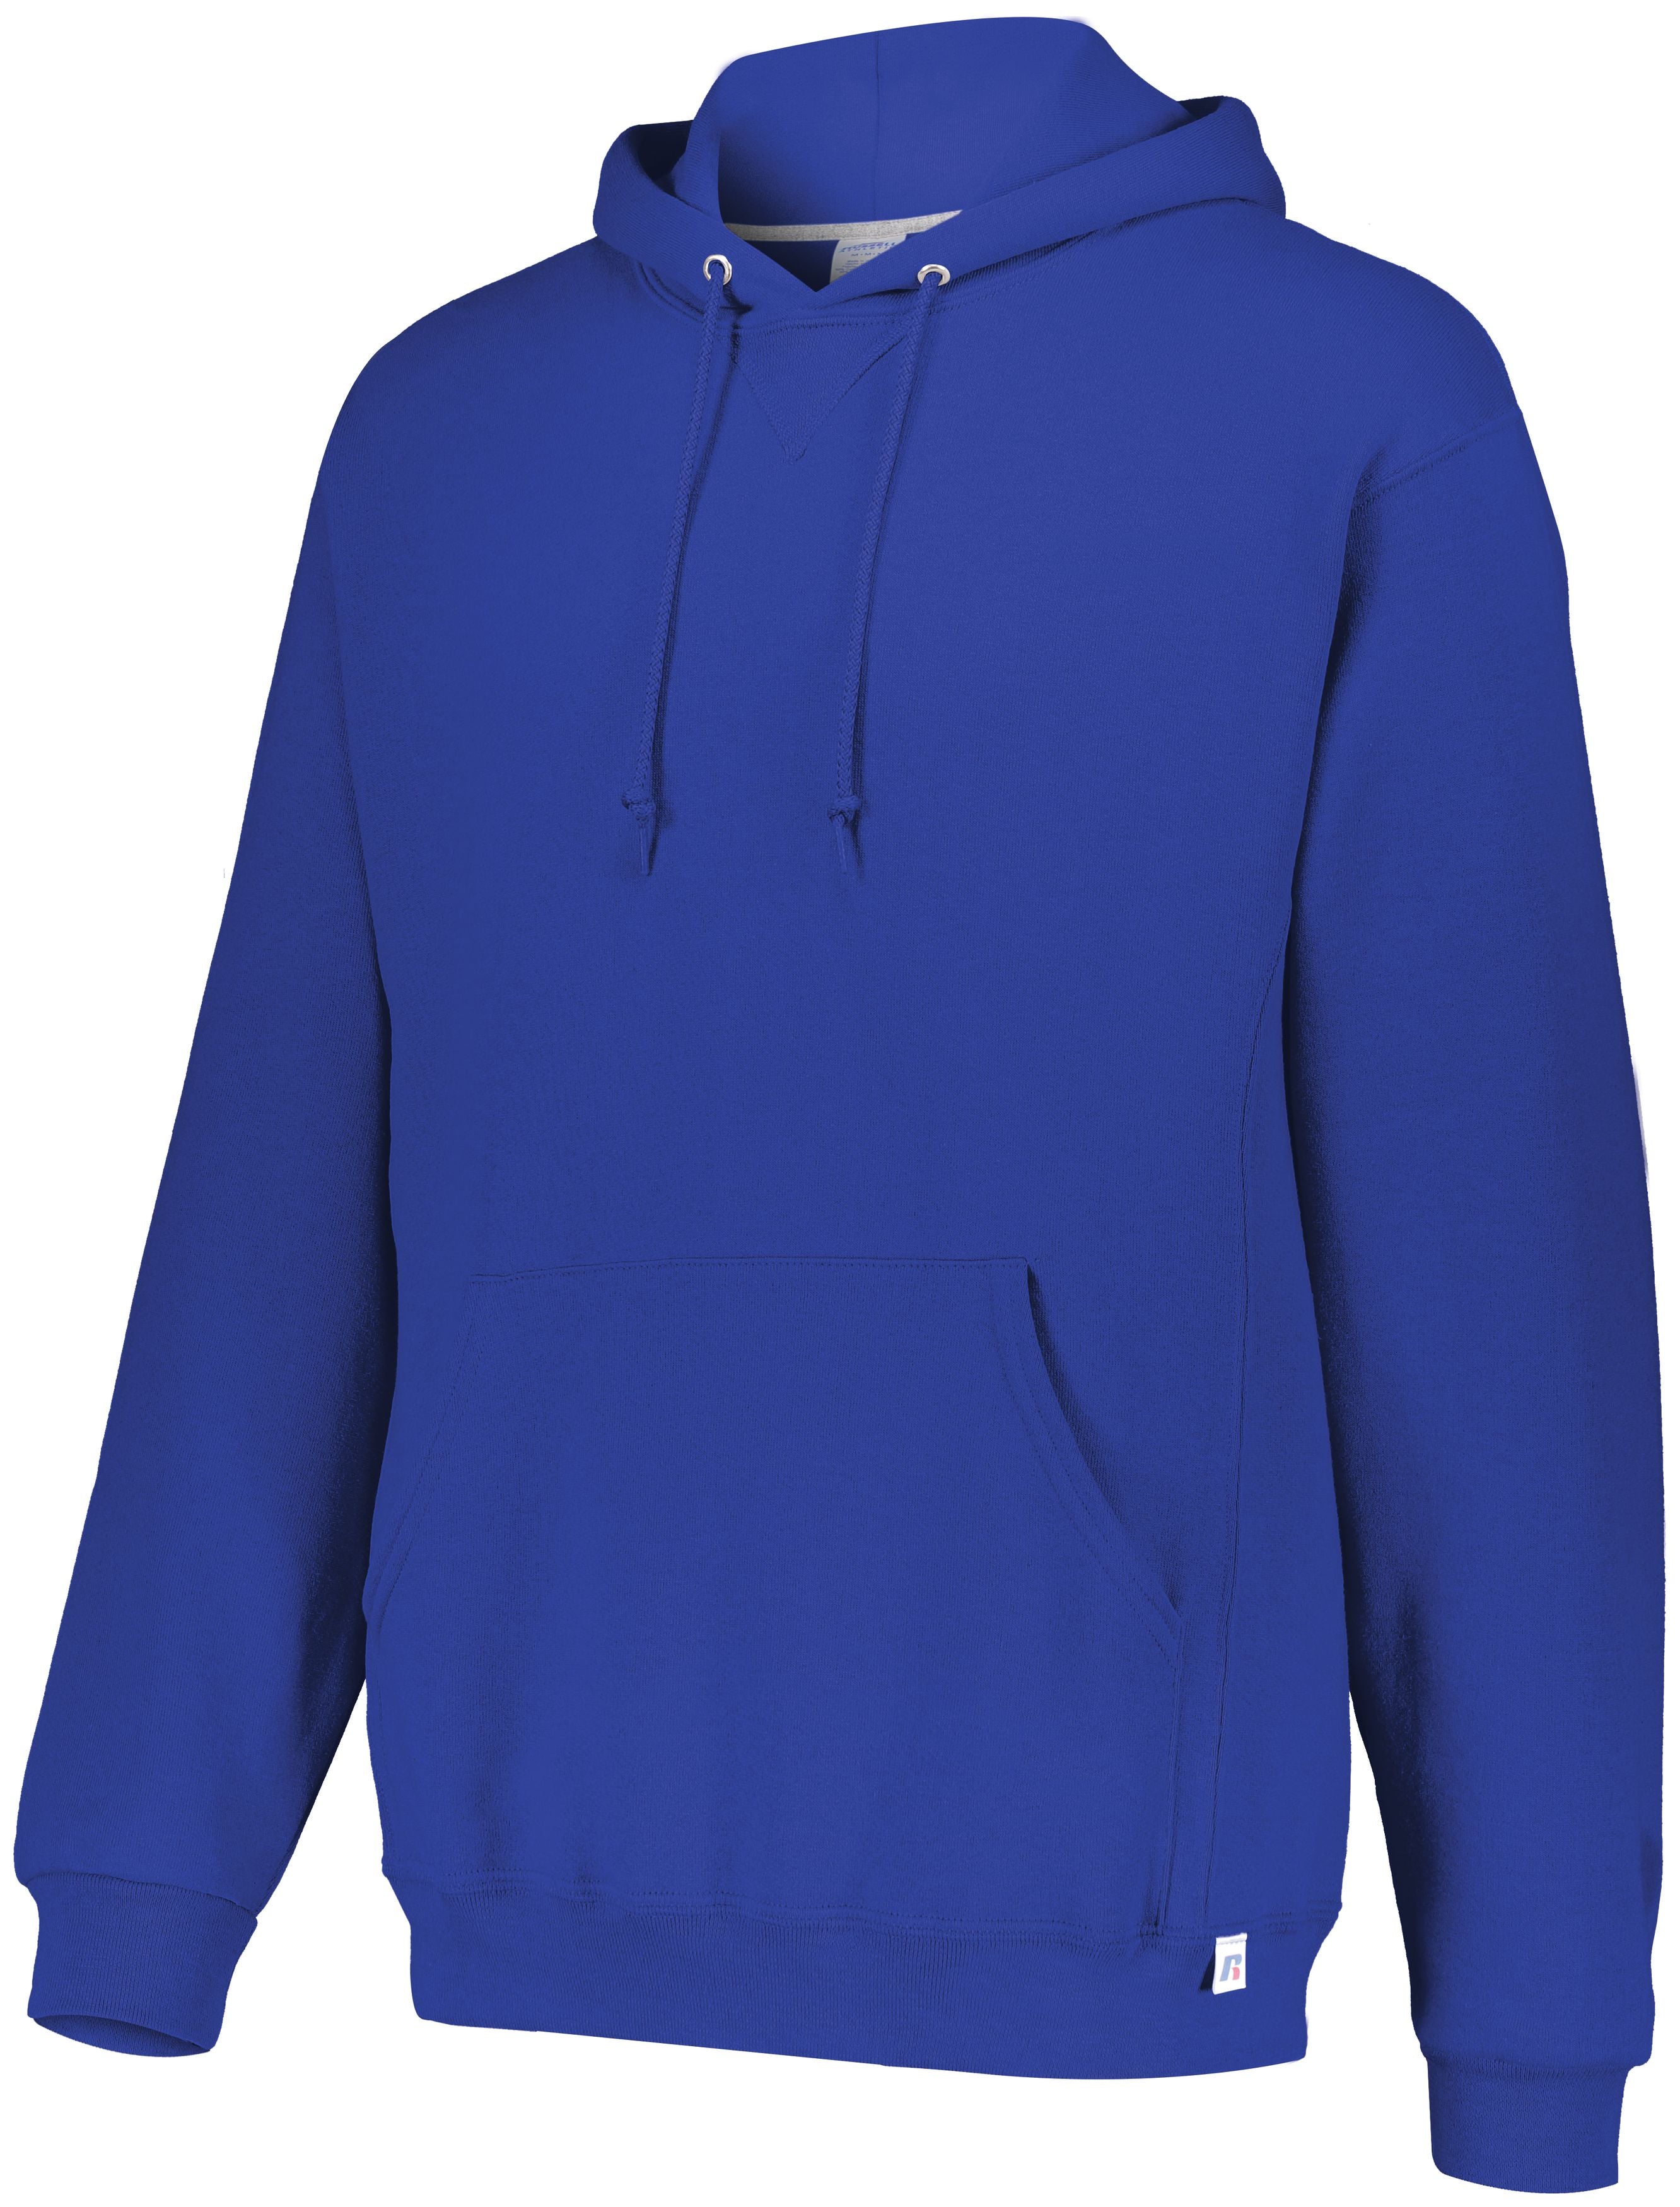 Russell Athletic Dri-Power Fleece Hoodie in Royal  -Part of the Adult, Russell-Athletic-Products, Shirts product lines at KanaleyCreations.com